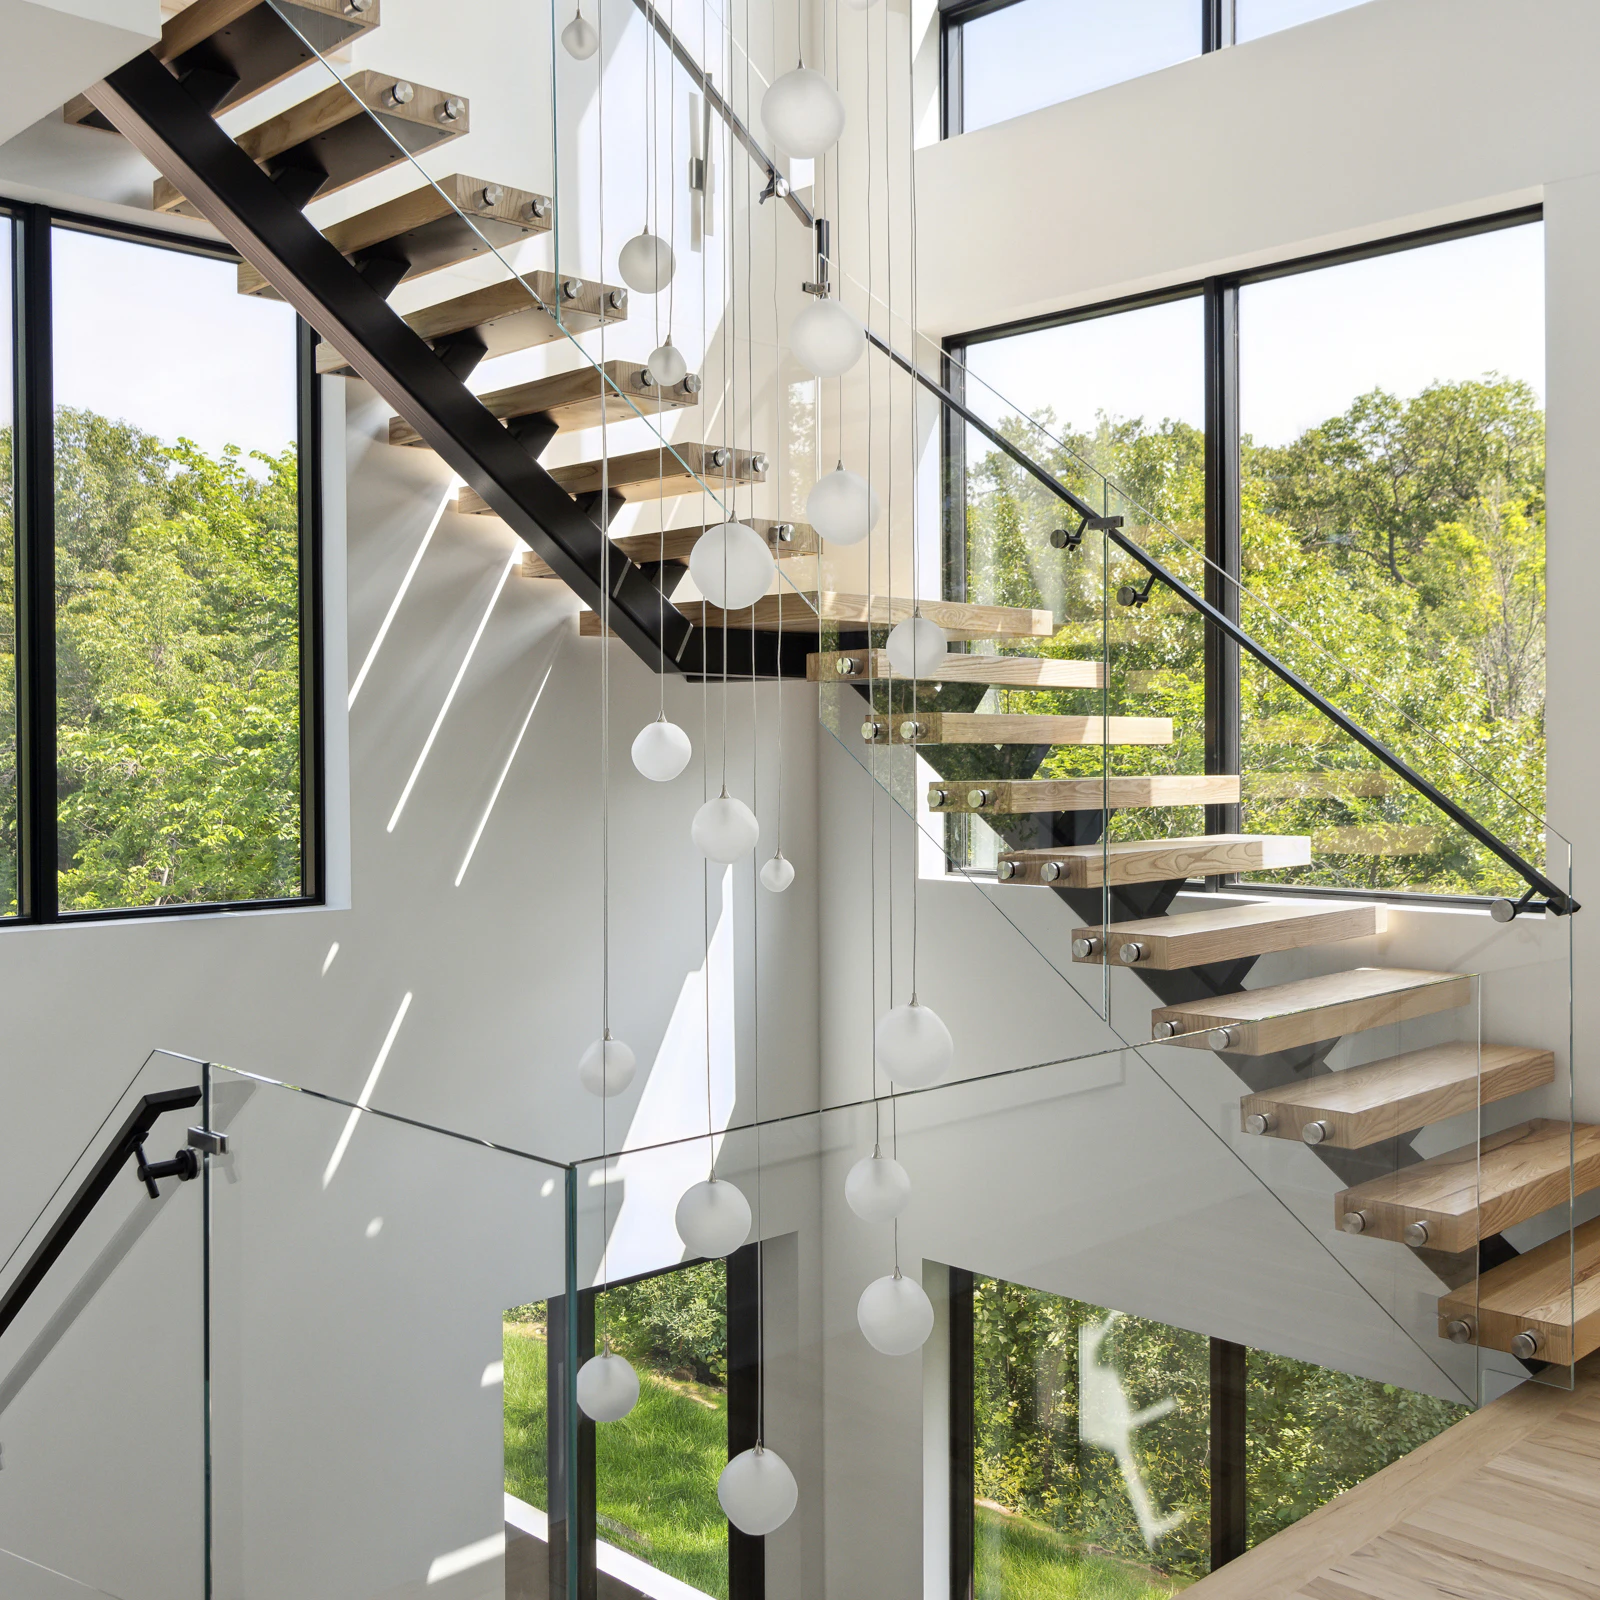 Floating steel and glass staircase